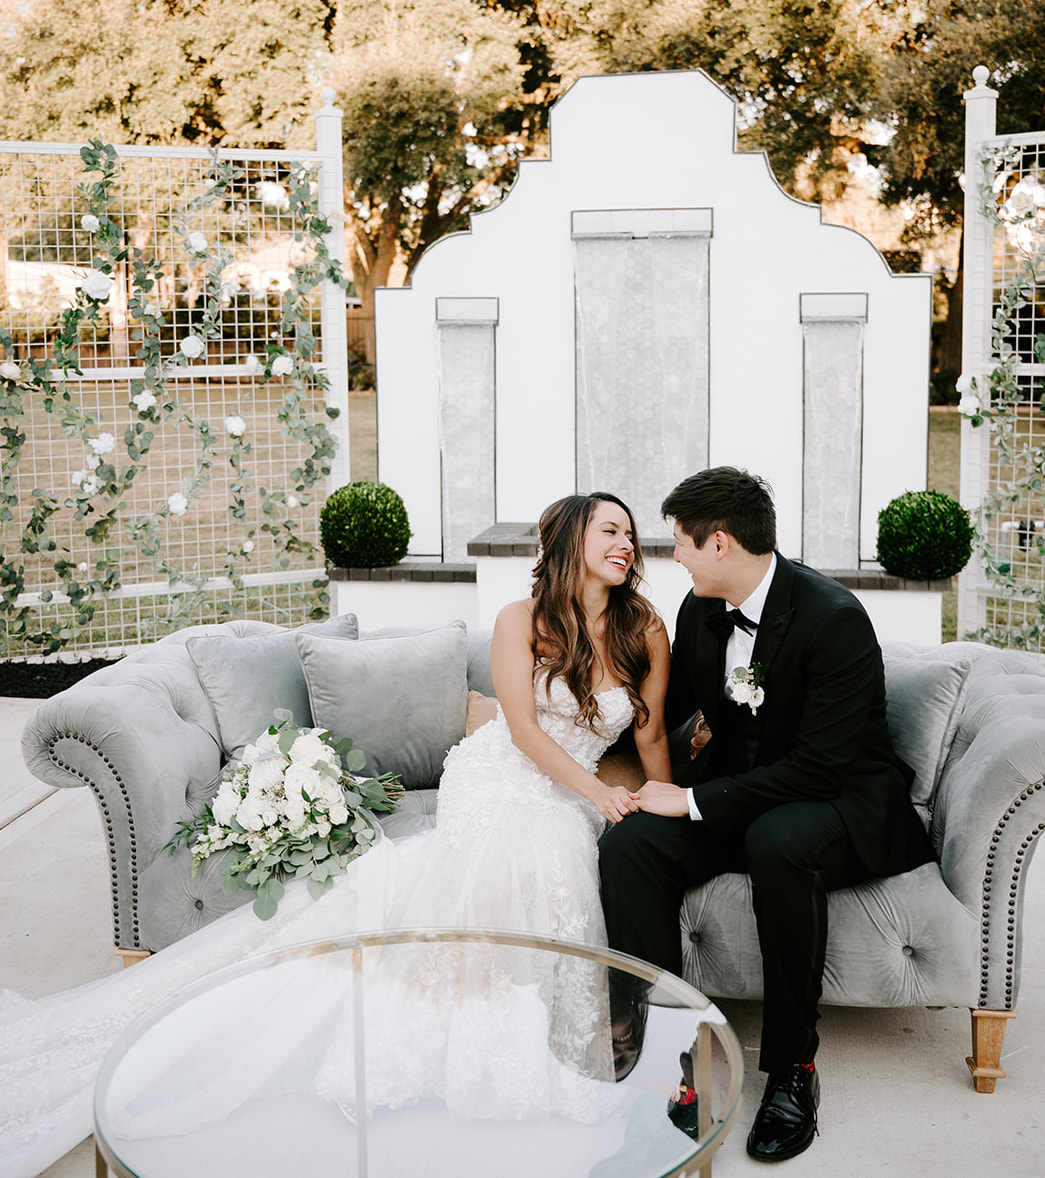 The bride and groom sit on a couch outside of their wedding venue in The Woodlands, TX.